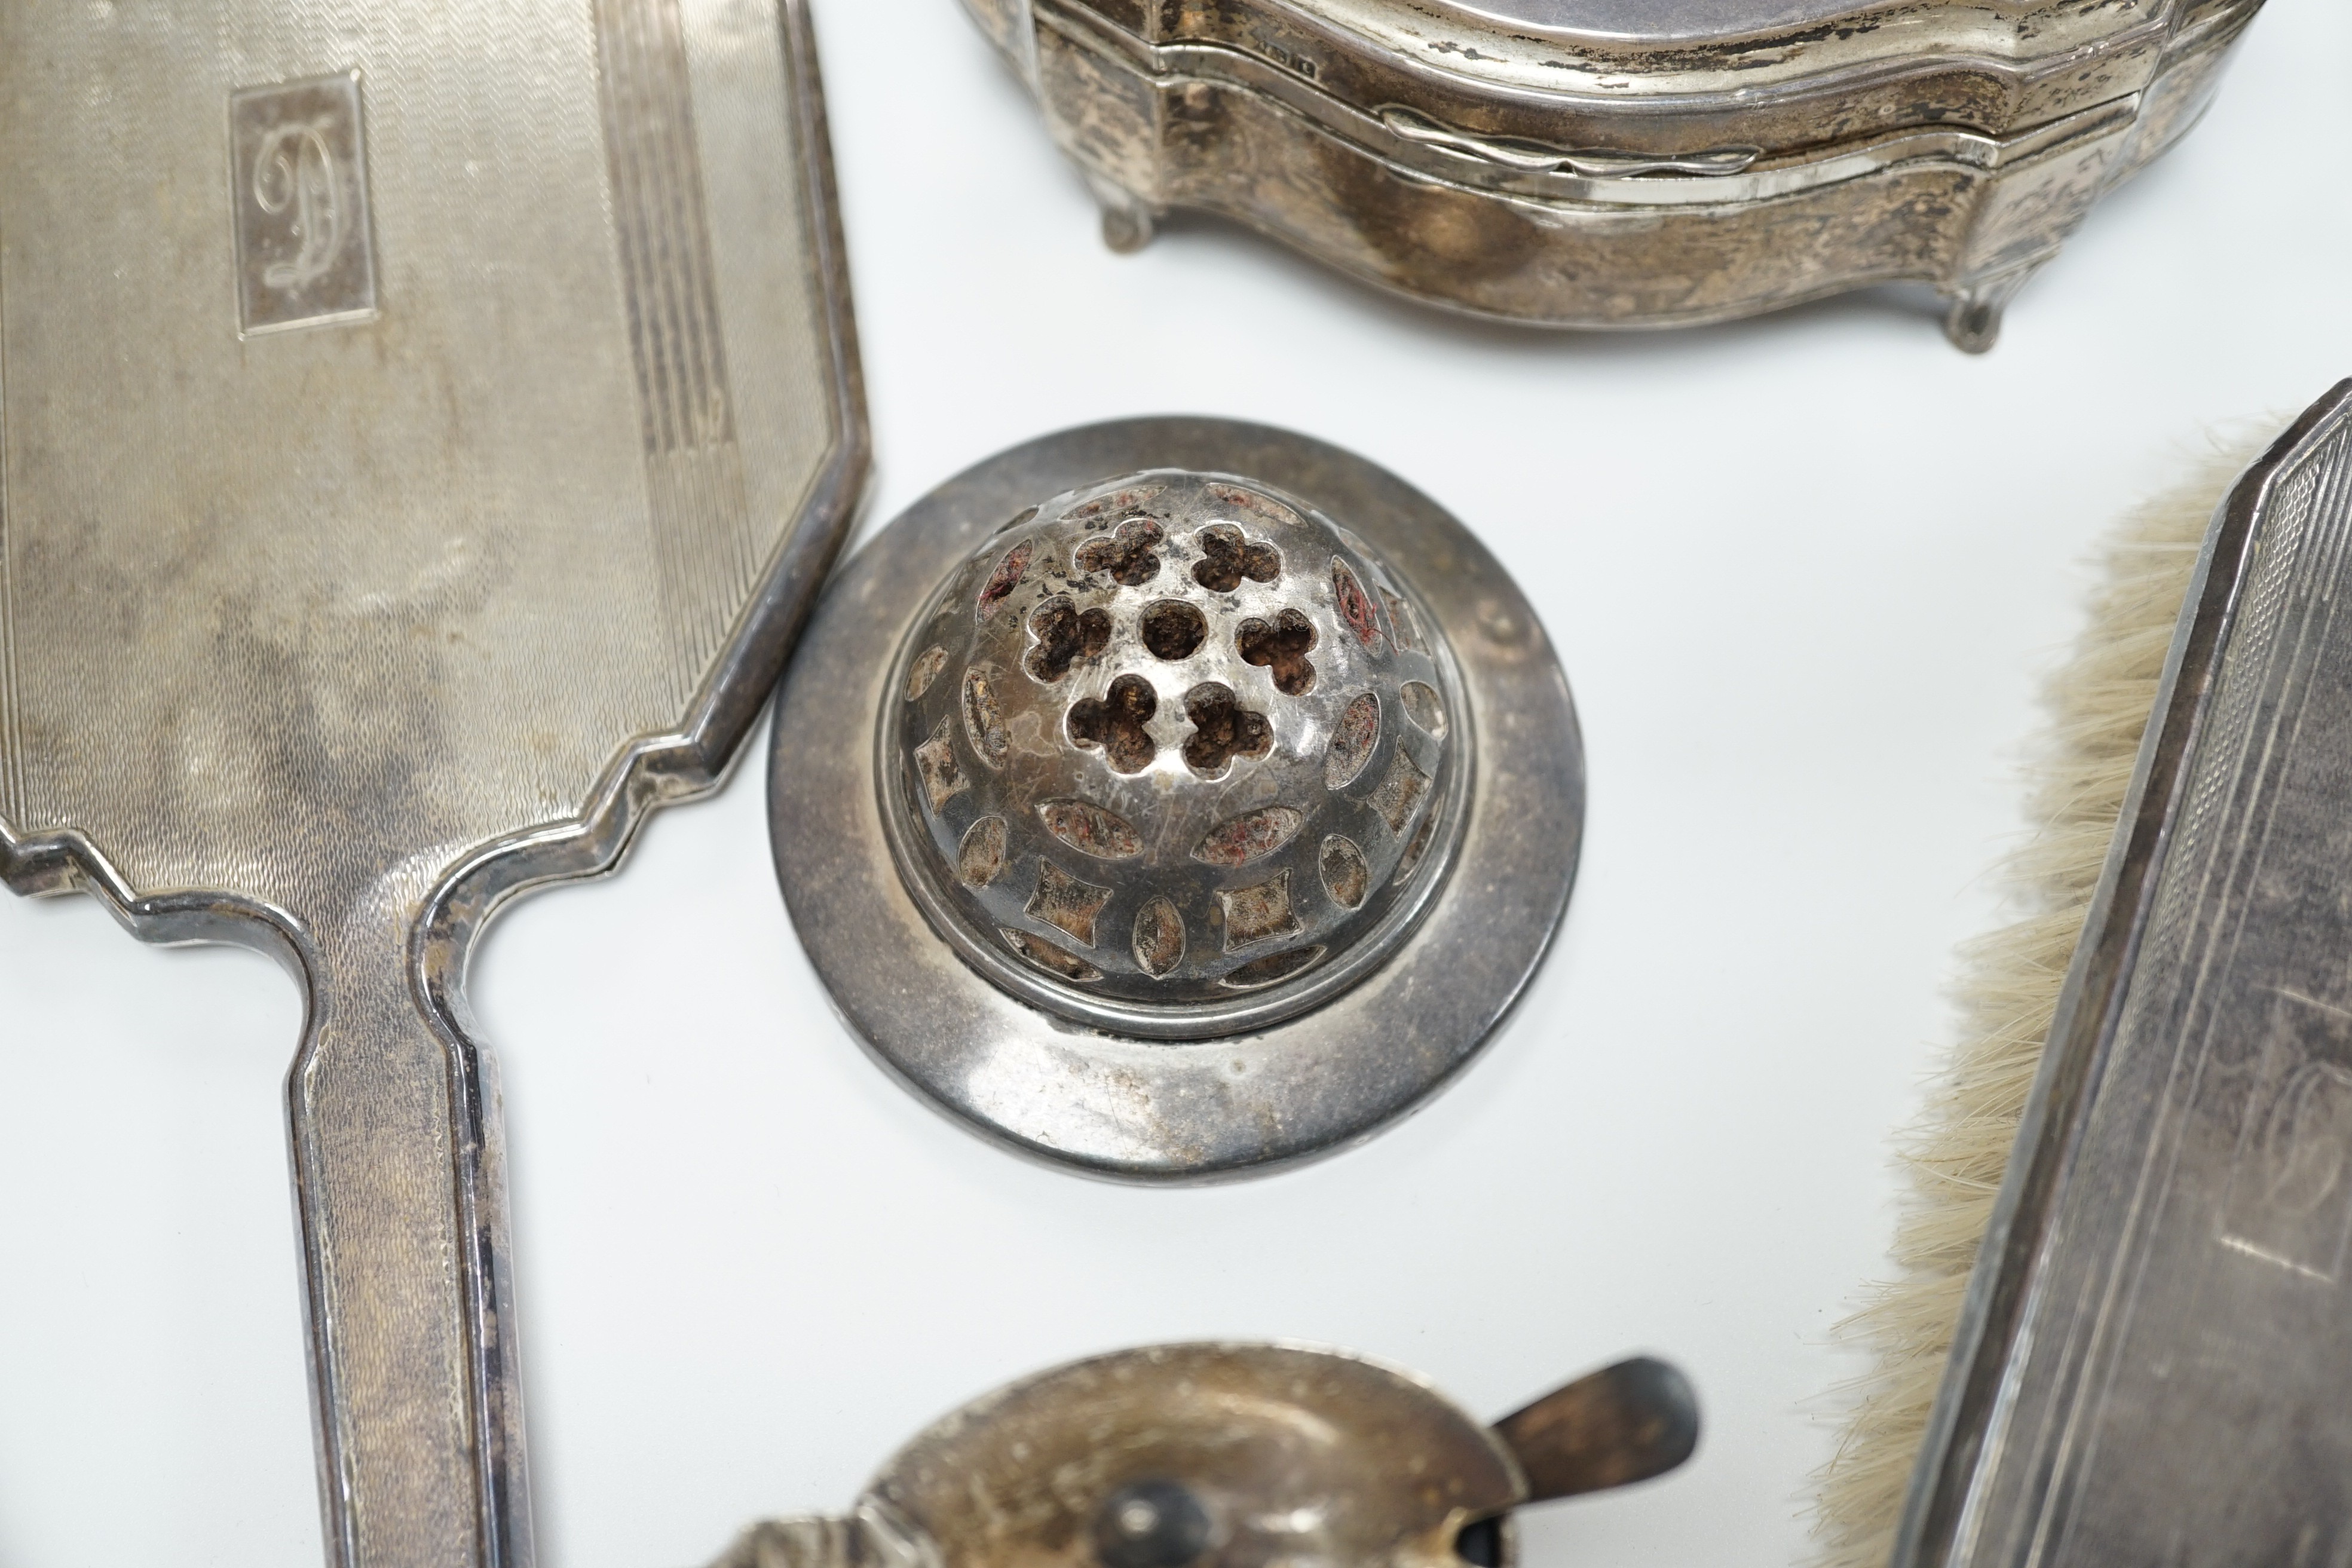 A George V silver mounted trinket box, Elkington & Co, Birmingham, 1918, 13.1cm, a silver mustard pot, two Scandinavian 925 condiments, two silver mounted scent bottles, hatpins and hatpin stand and a silver mounted thre